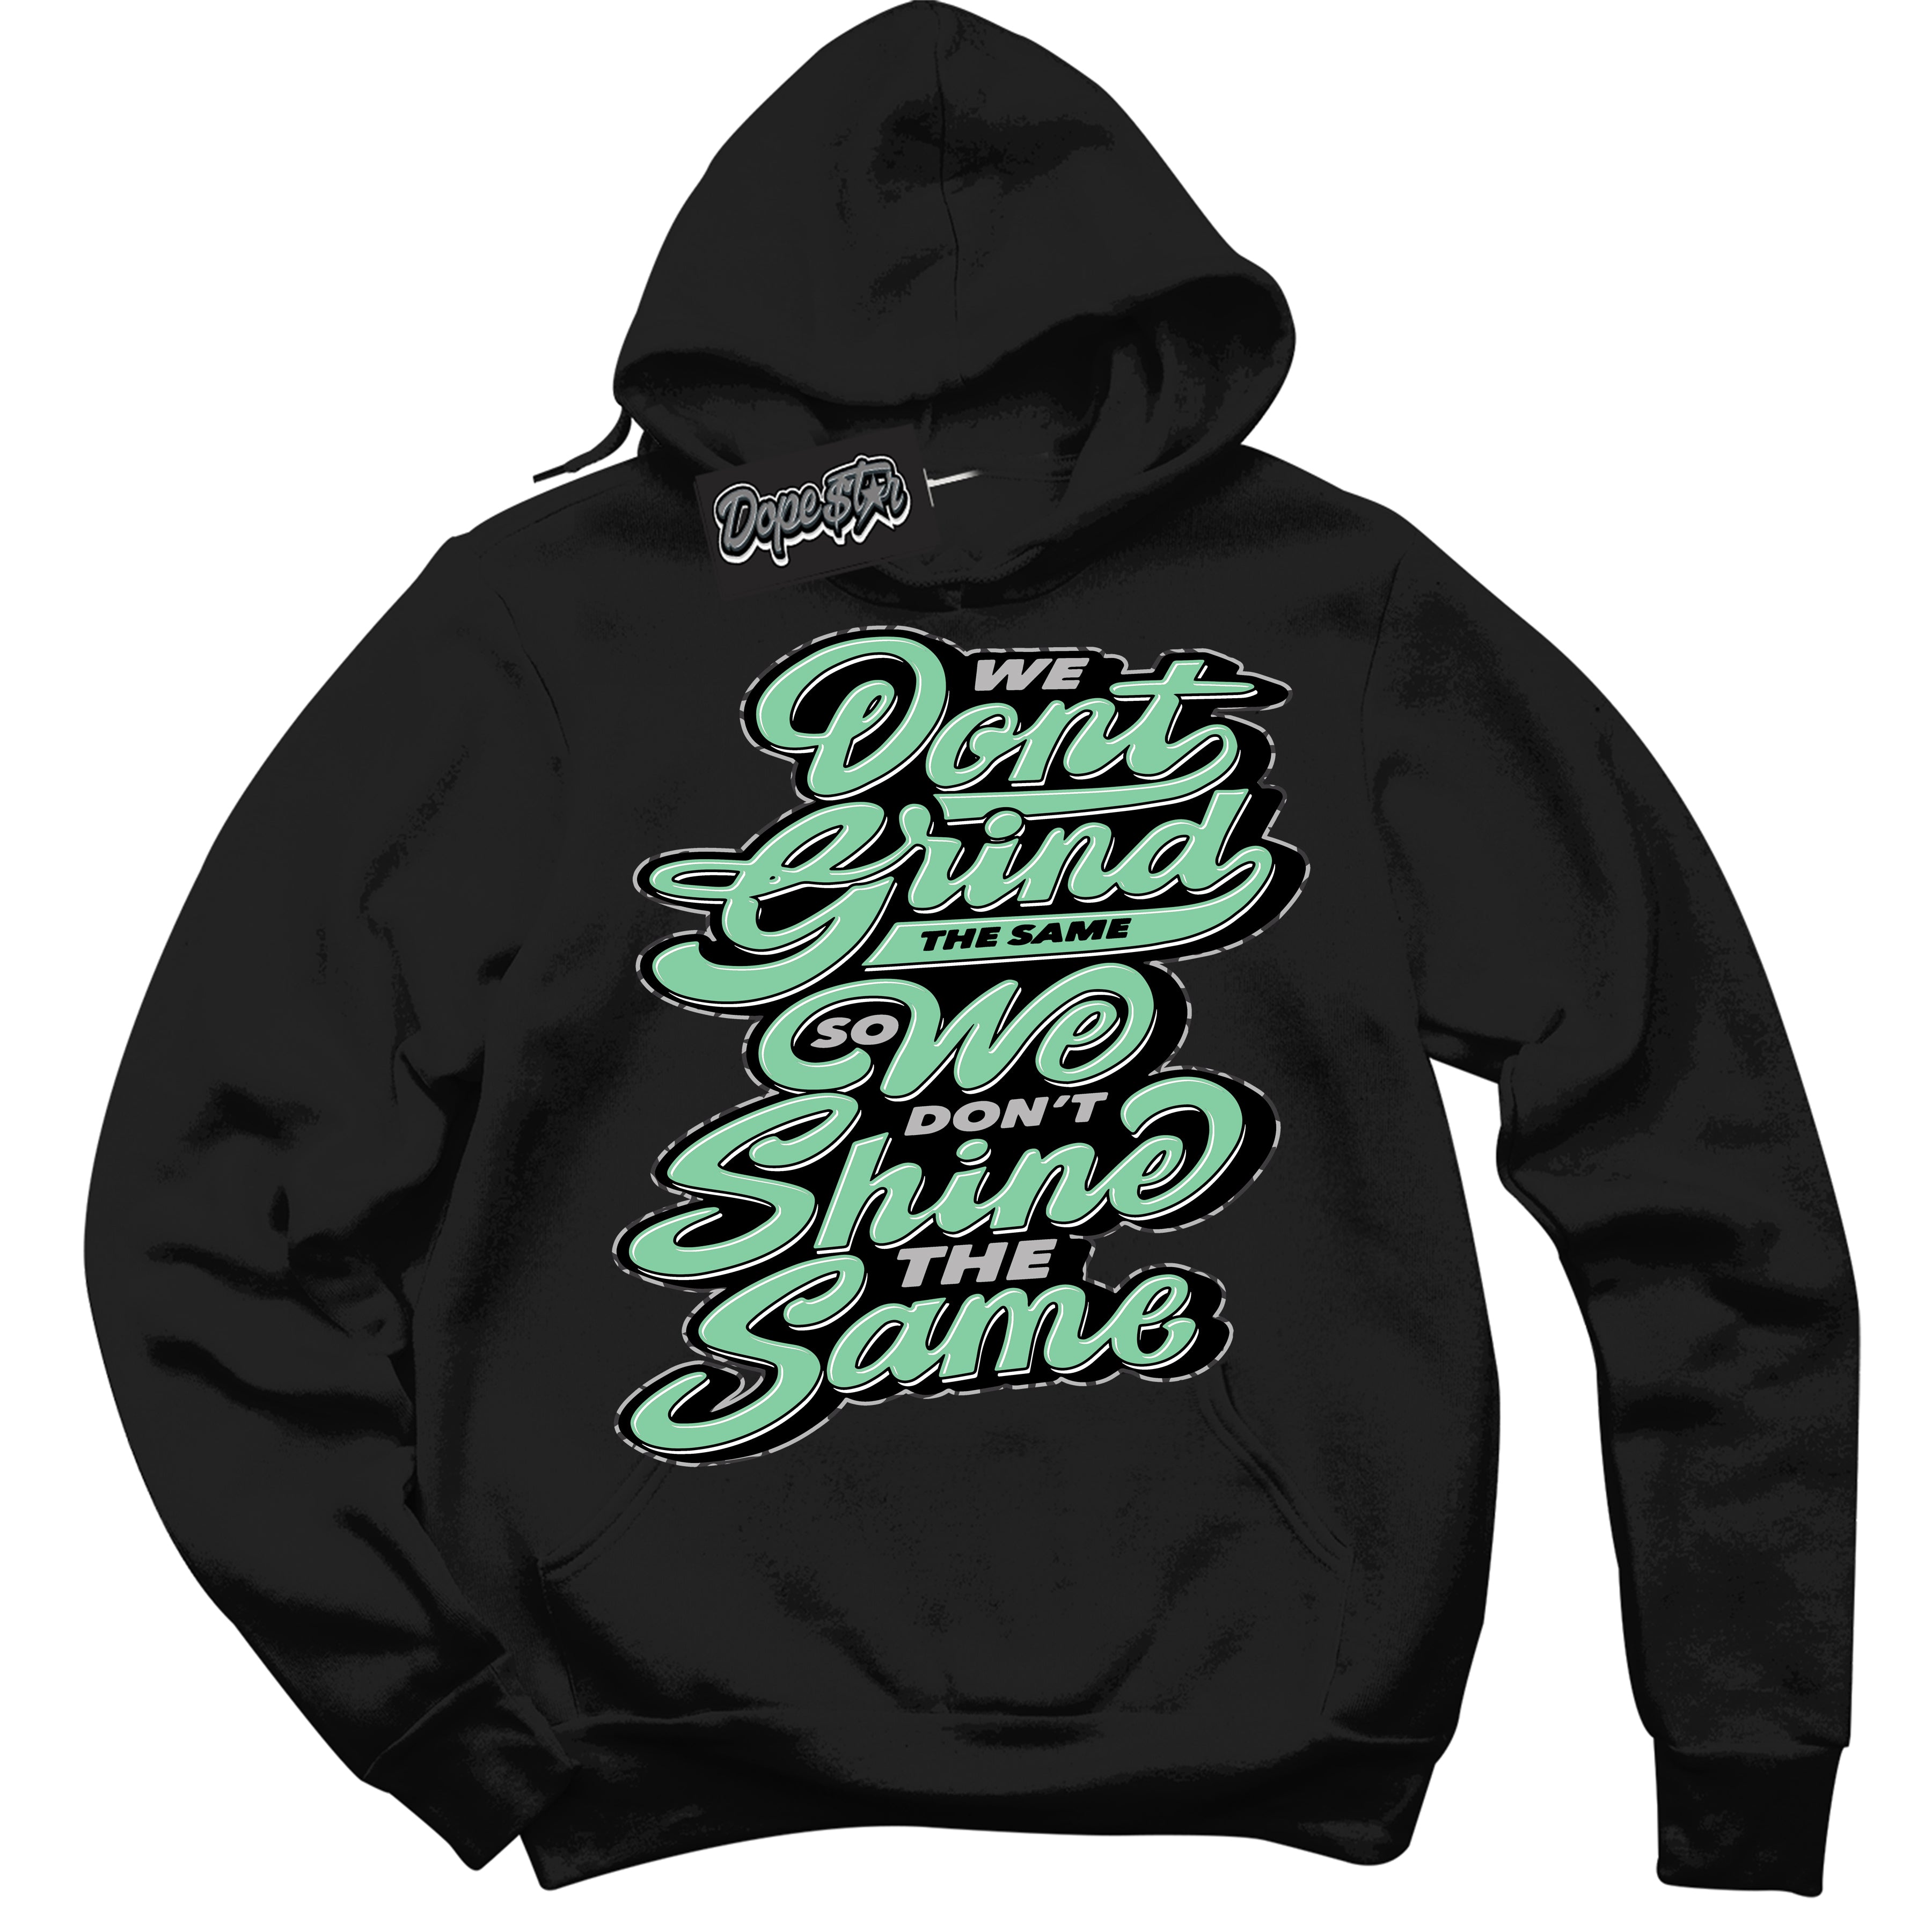 Cool Black Graphic DopeStar Hoodie with “ Grind Shine “ print, that perfectly matches Green Glow 3S sneakers